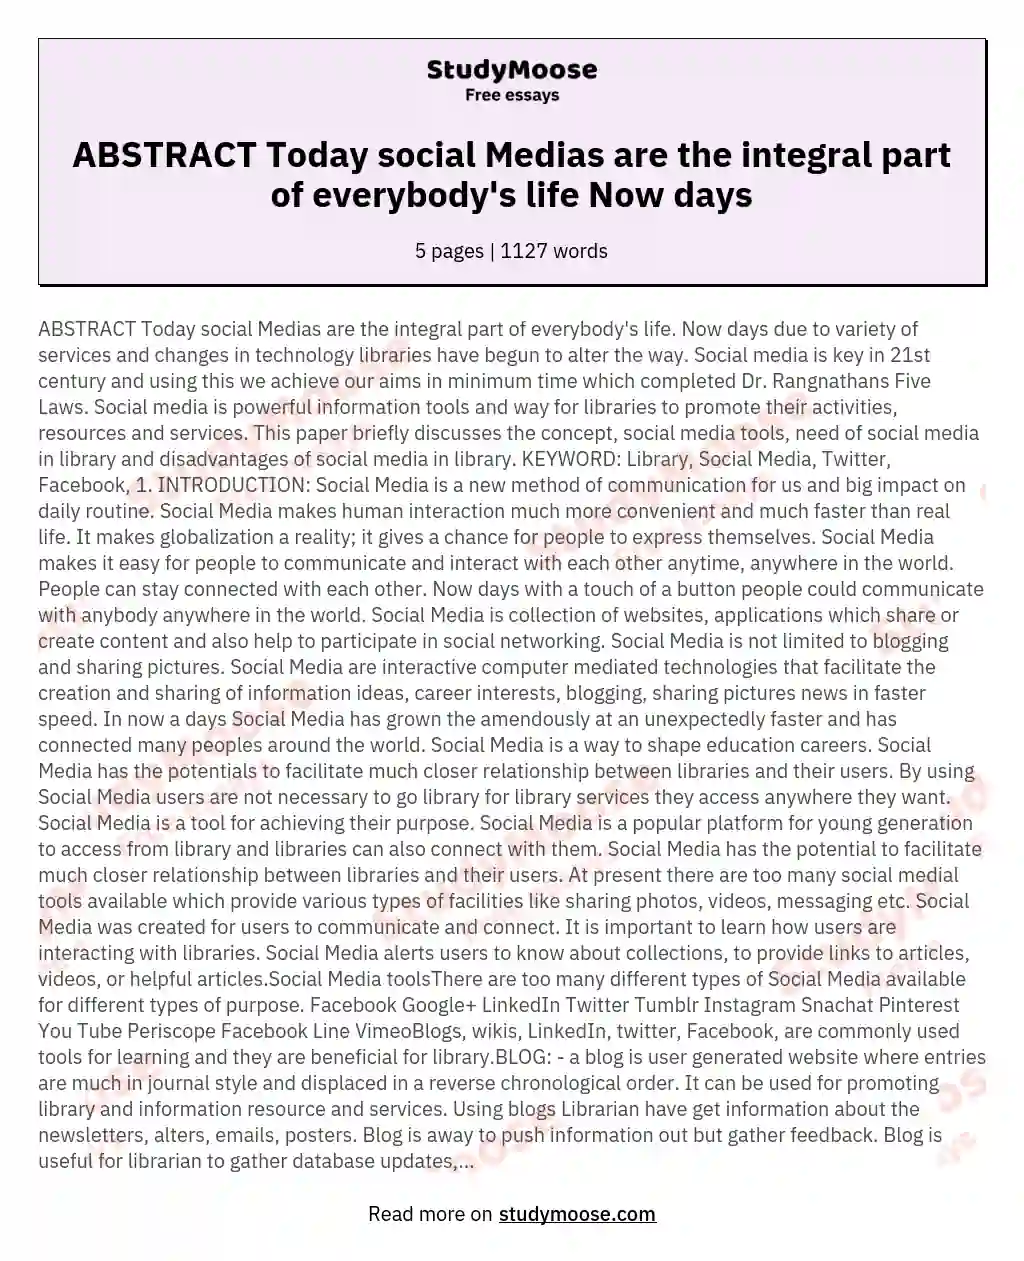 ABSTRACT Today social Medias are the integral part of everybody's life Now days essay